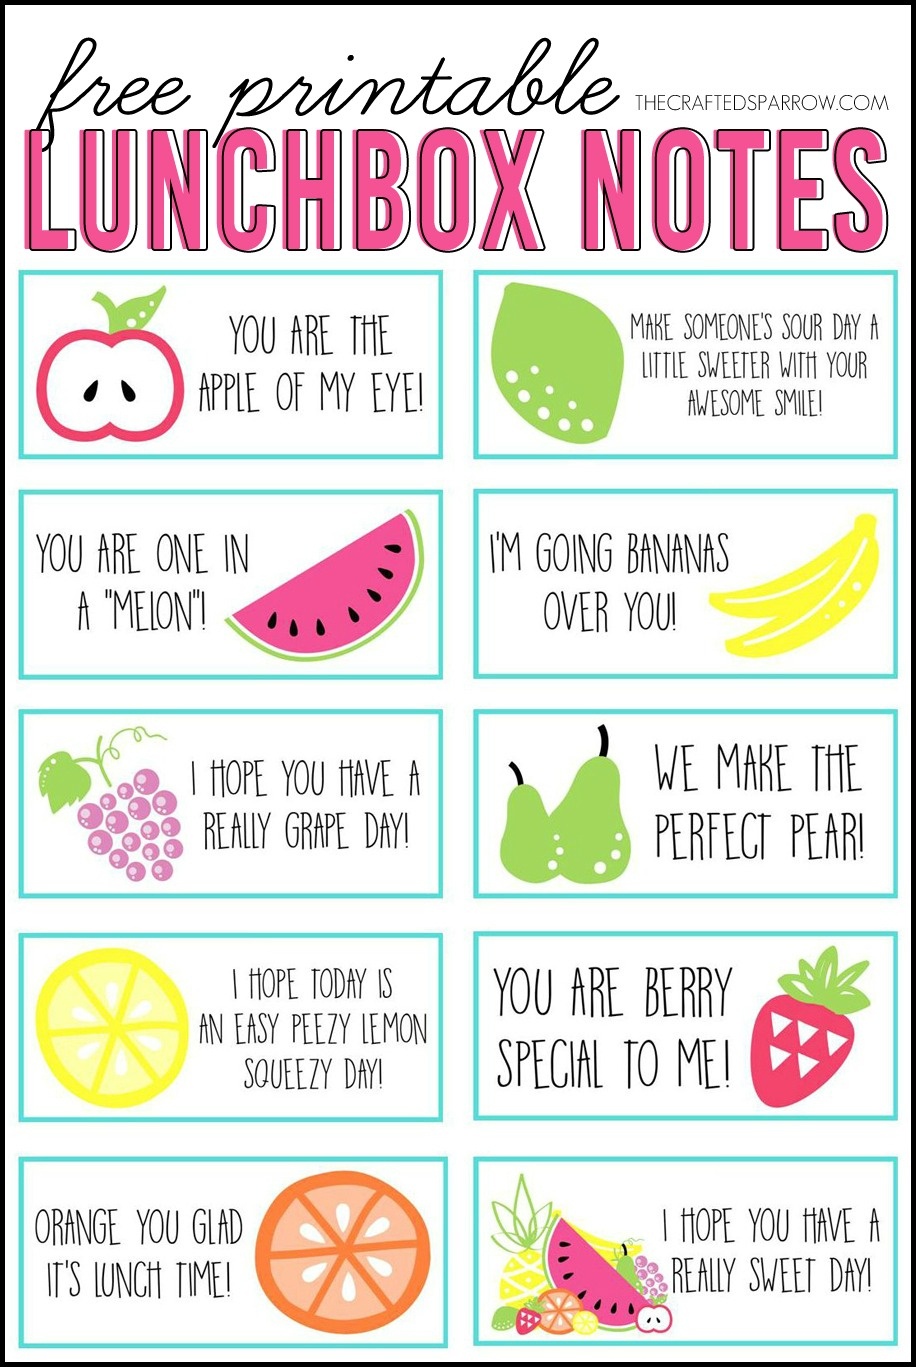 Free Printable Lunchbox Notes - Free Printable Lunchbox Notes